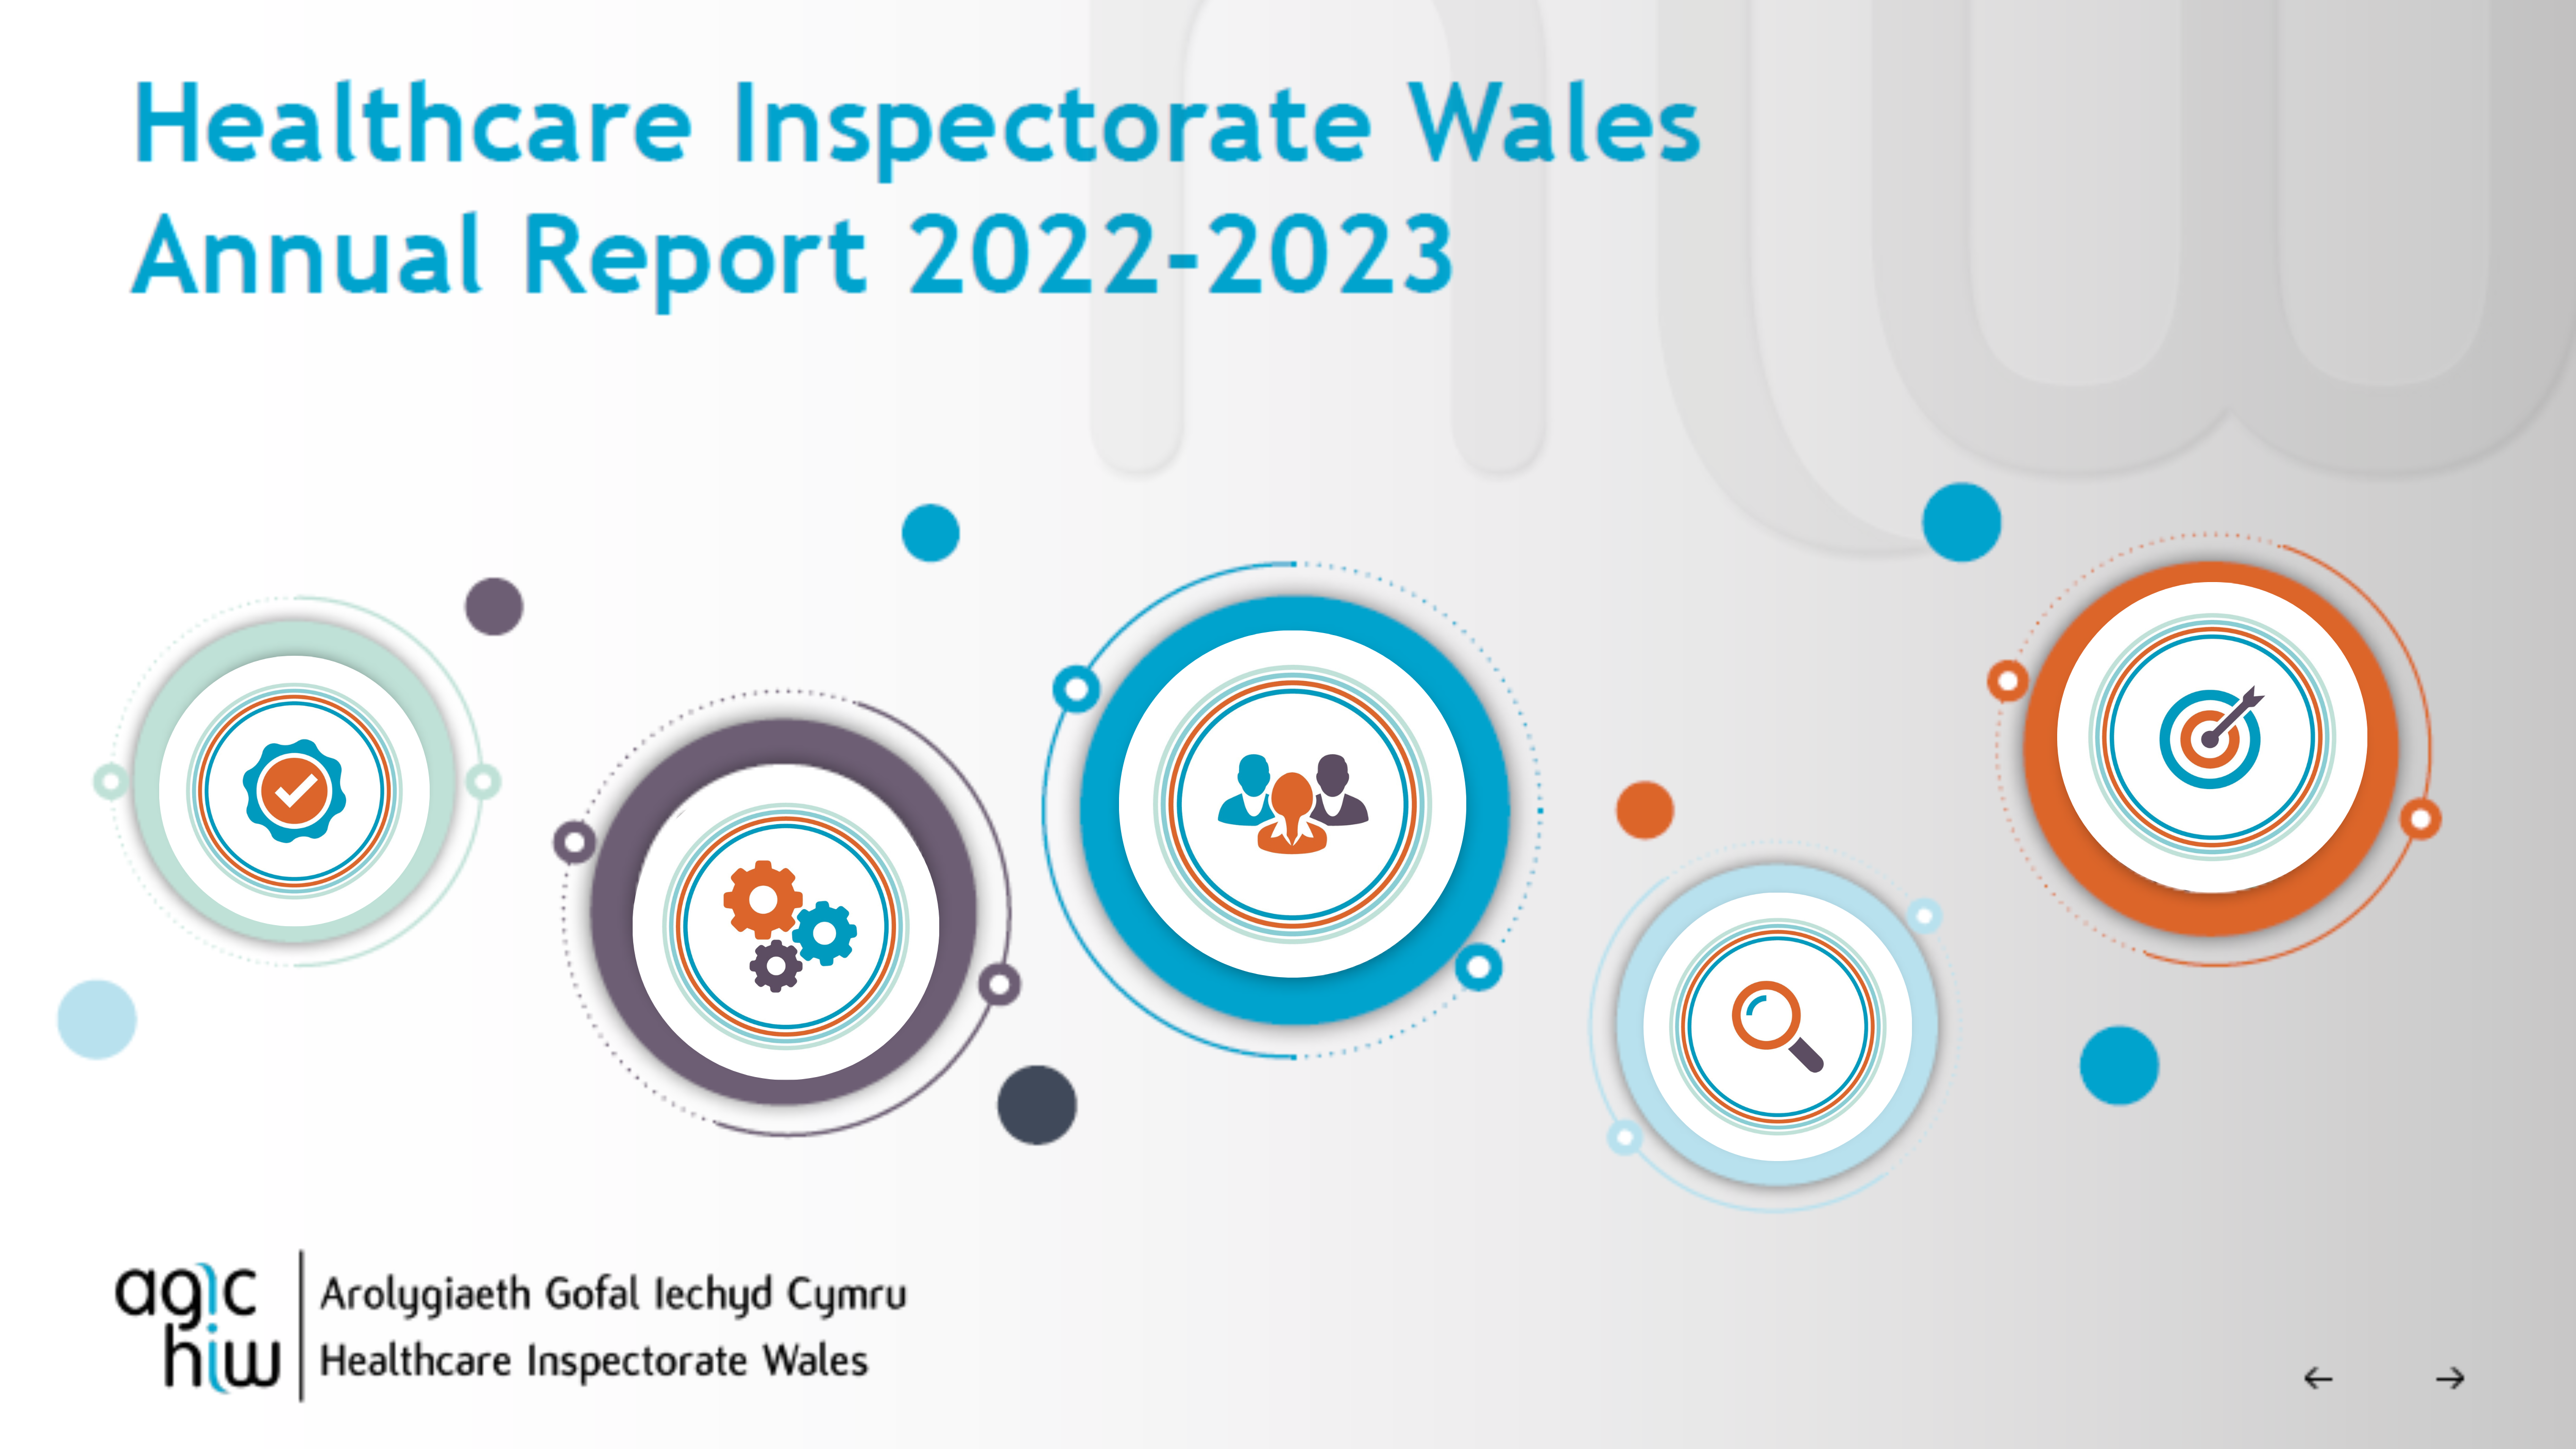 Healthcare Inspectorate Wales Annual Report 2022-2023